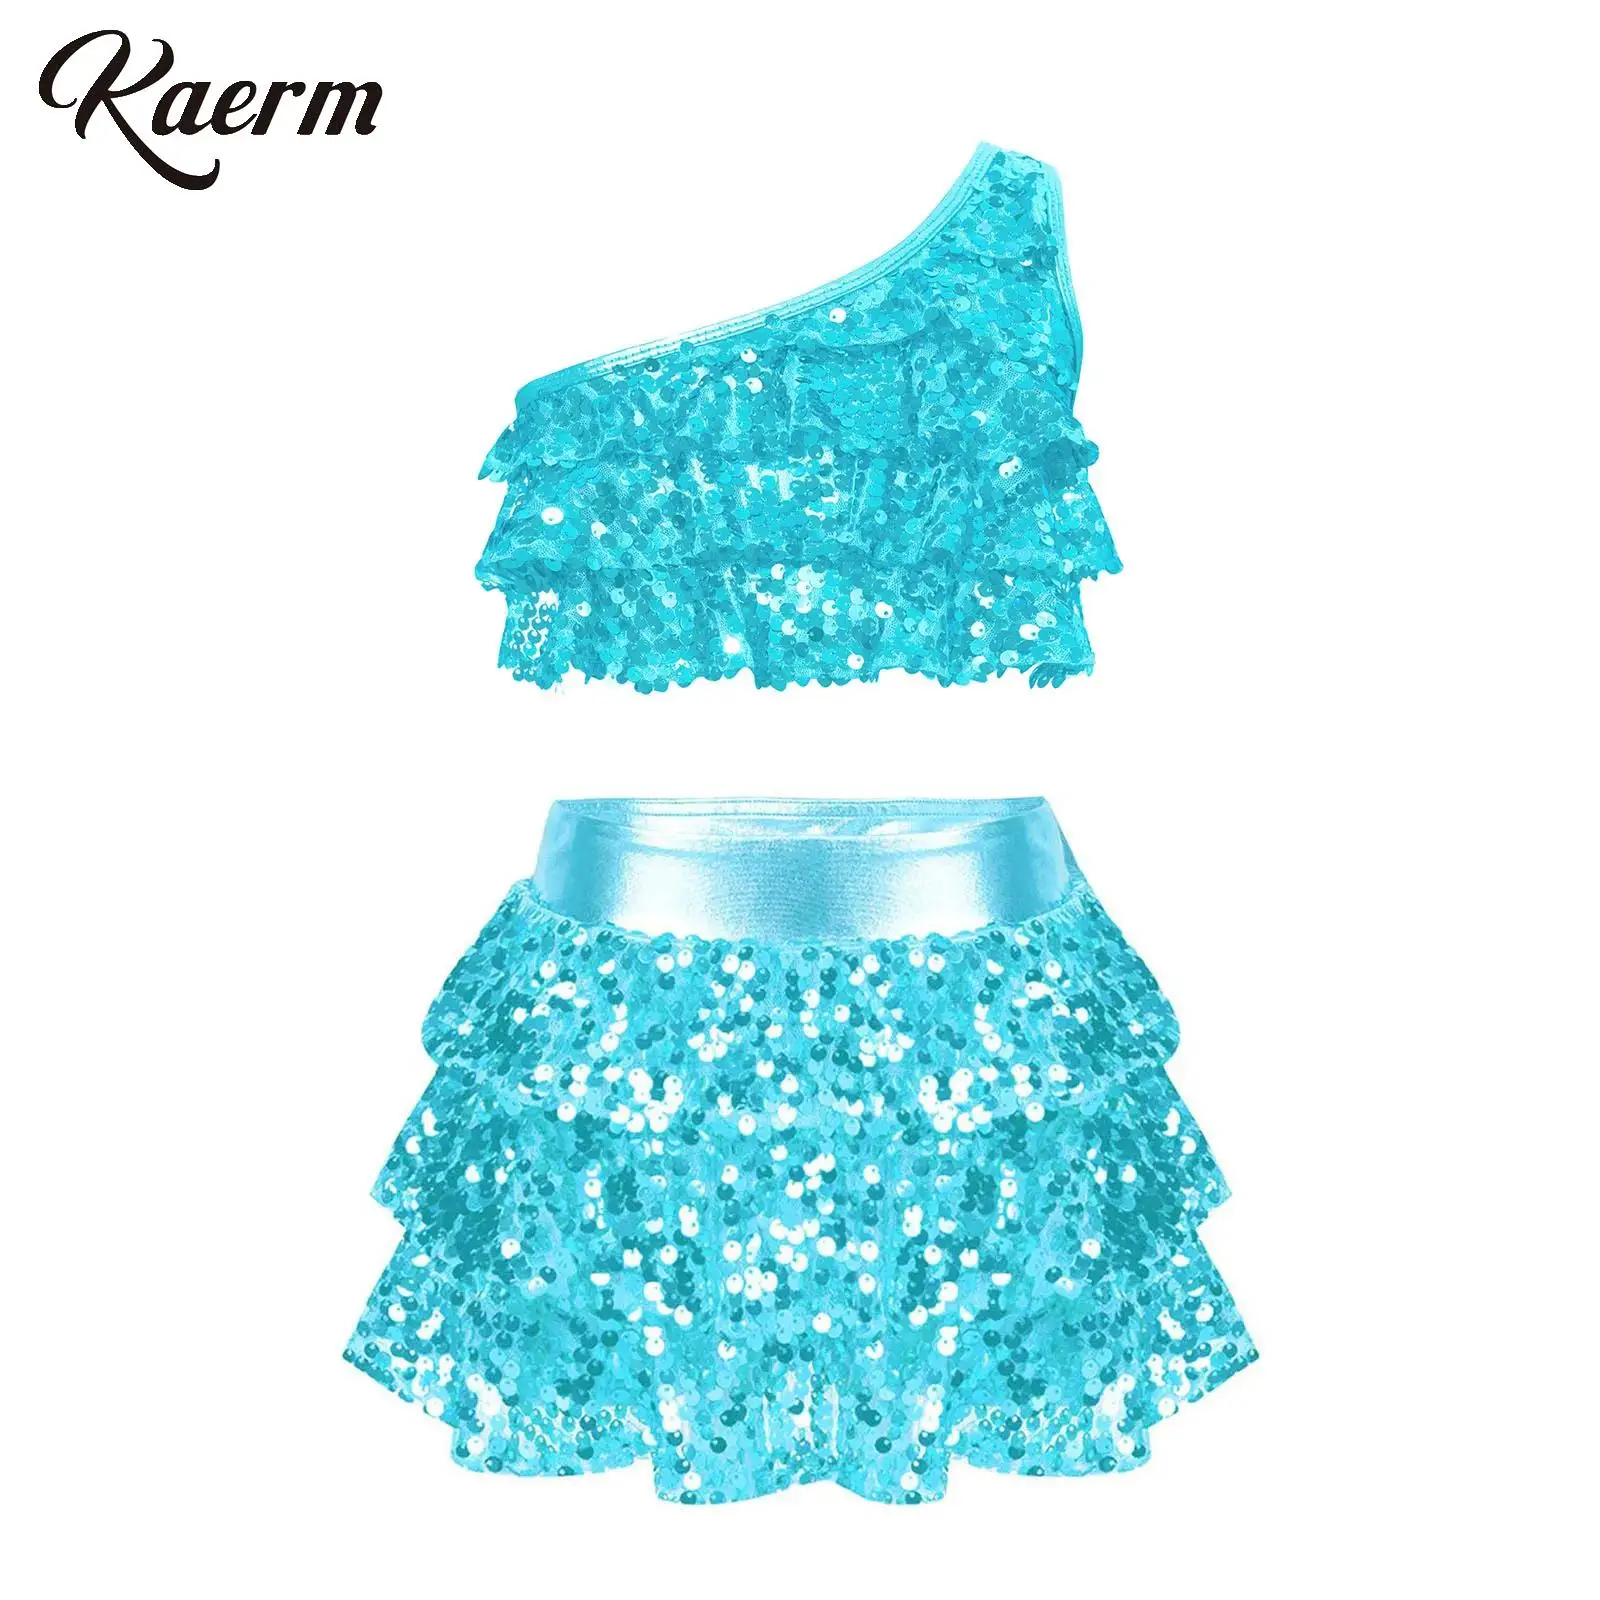 

Kids Girls Latin Dance Performance Outfit Shiny Sequins Tiered Ruffles Crop Top Vest with Metallic Skirted Shorts Culottes